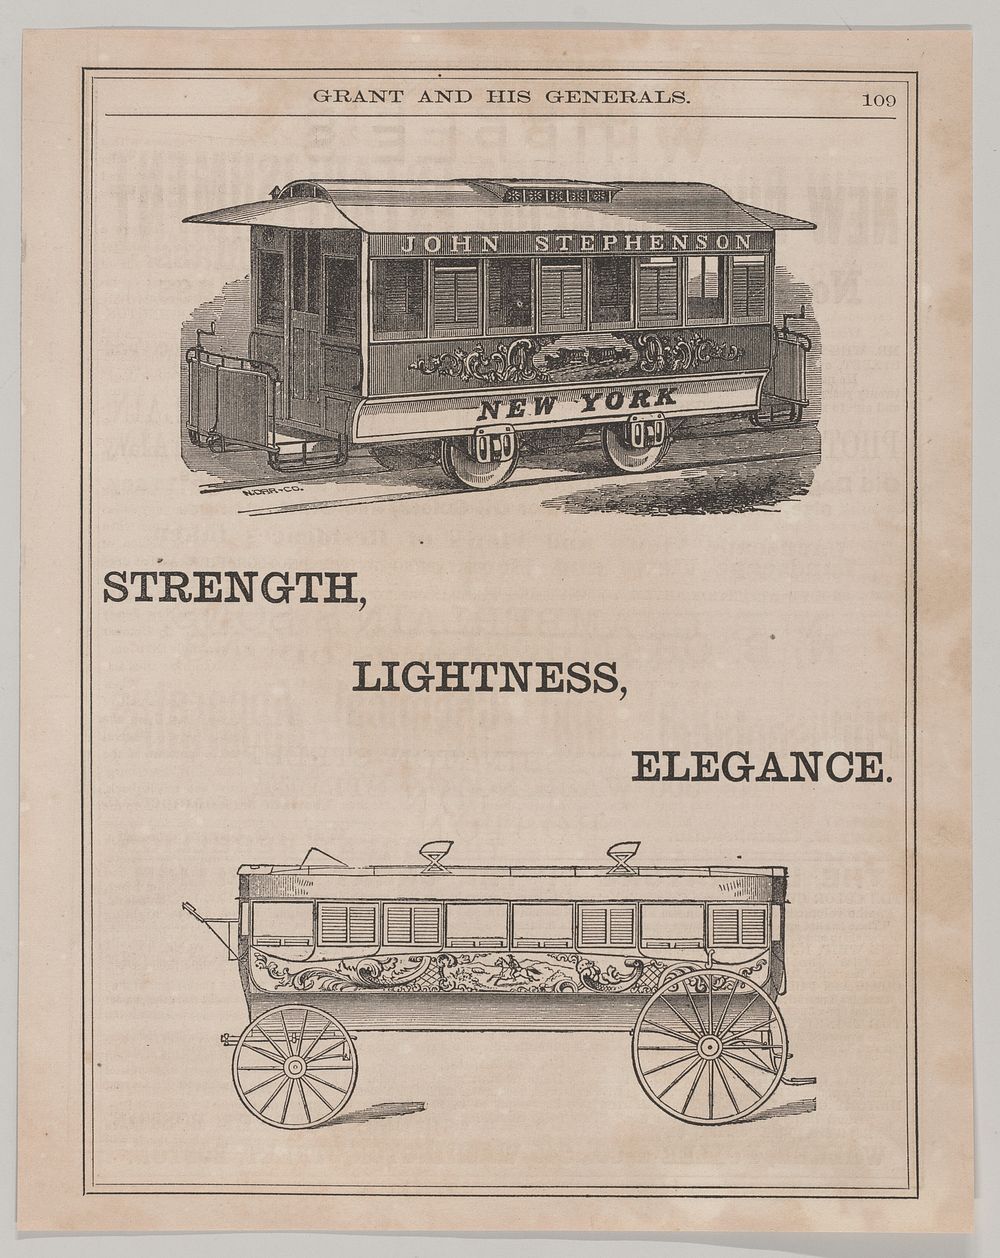 Advertisement for Street Car and Omnibus made by John Stephenson of New York